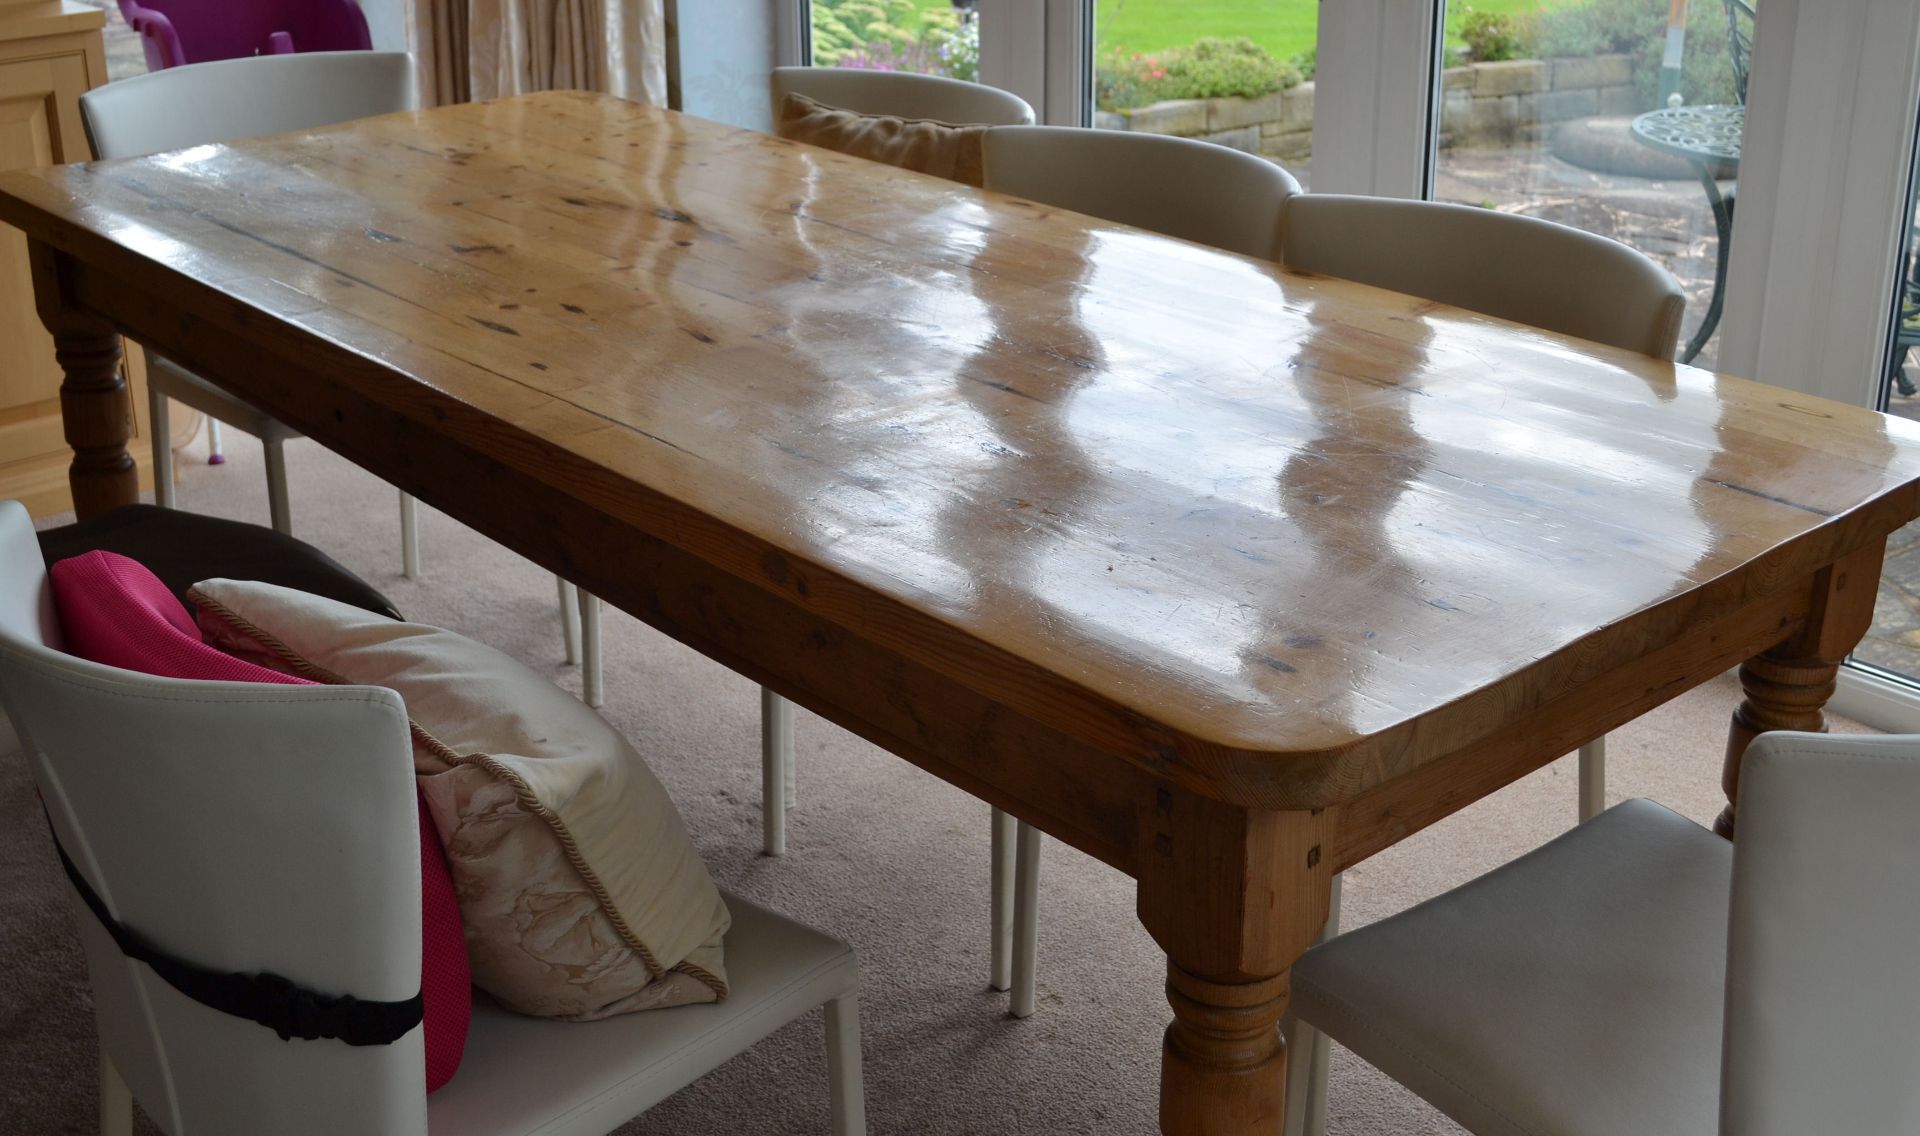 1 x Bespoke Pine Dining Table Made From Reclaimed Church Pews - CL226 - Location: Knutsford WA16